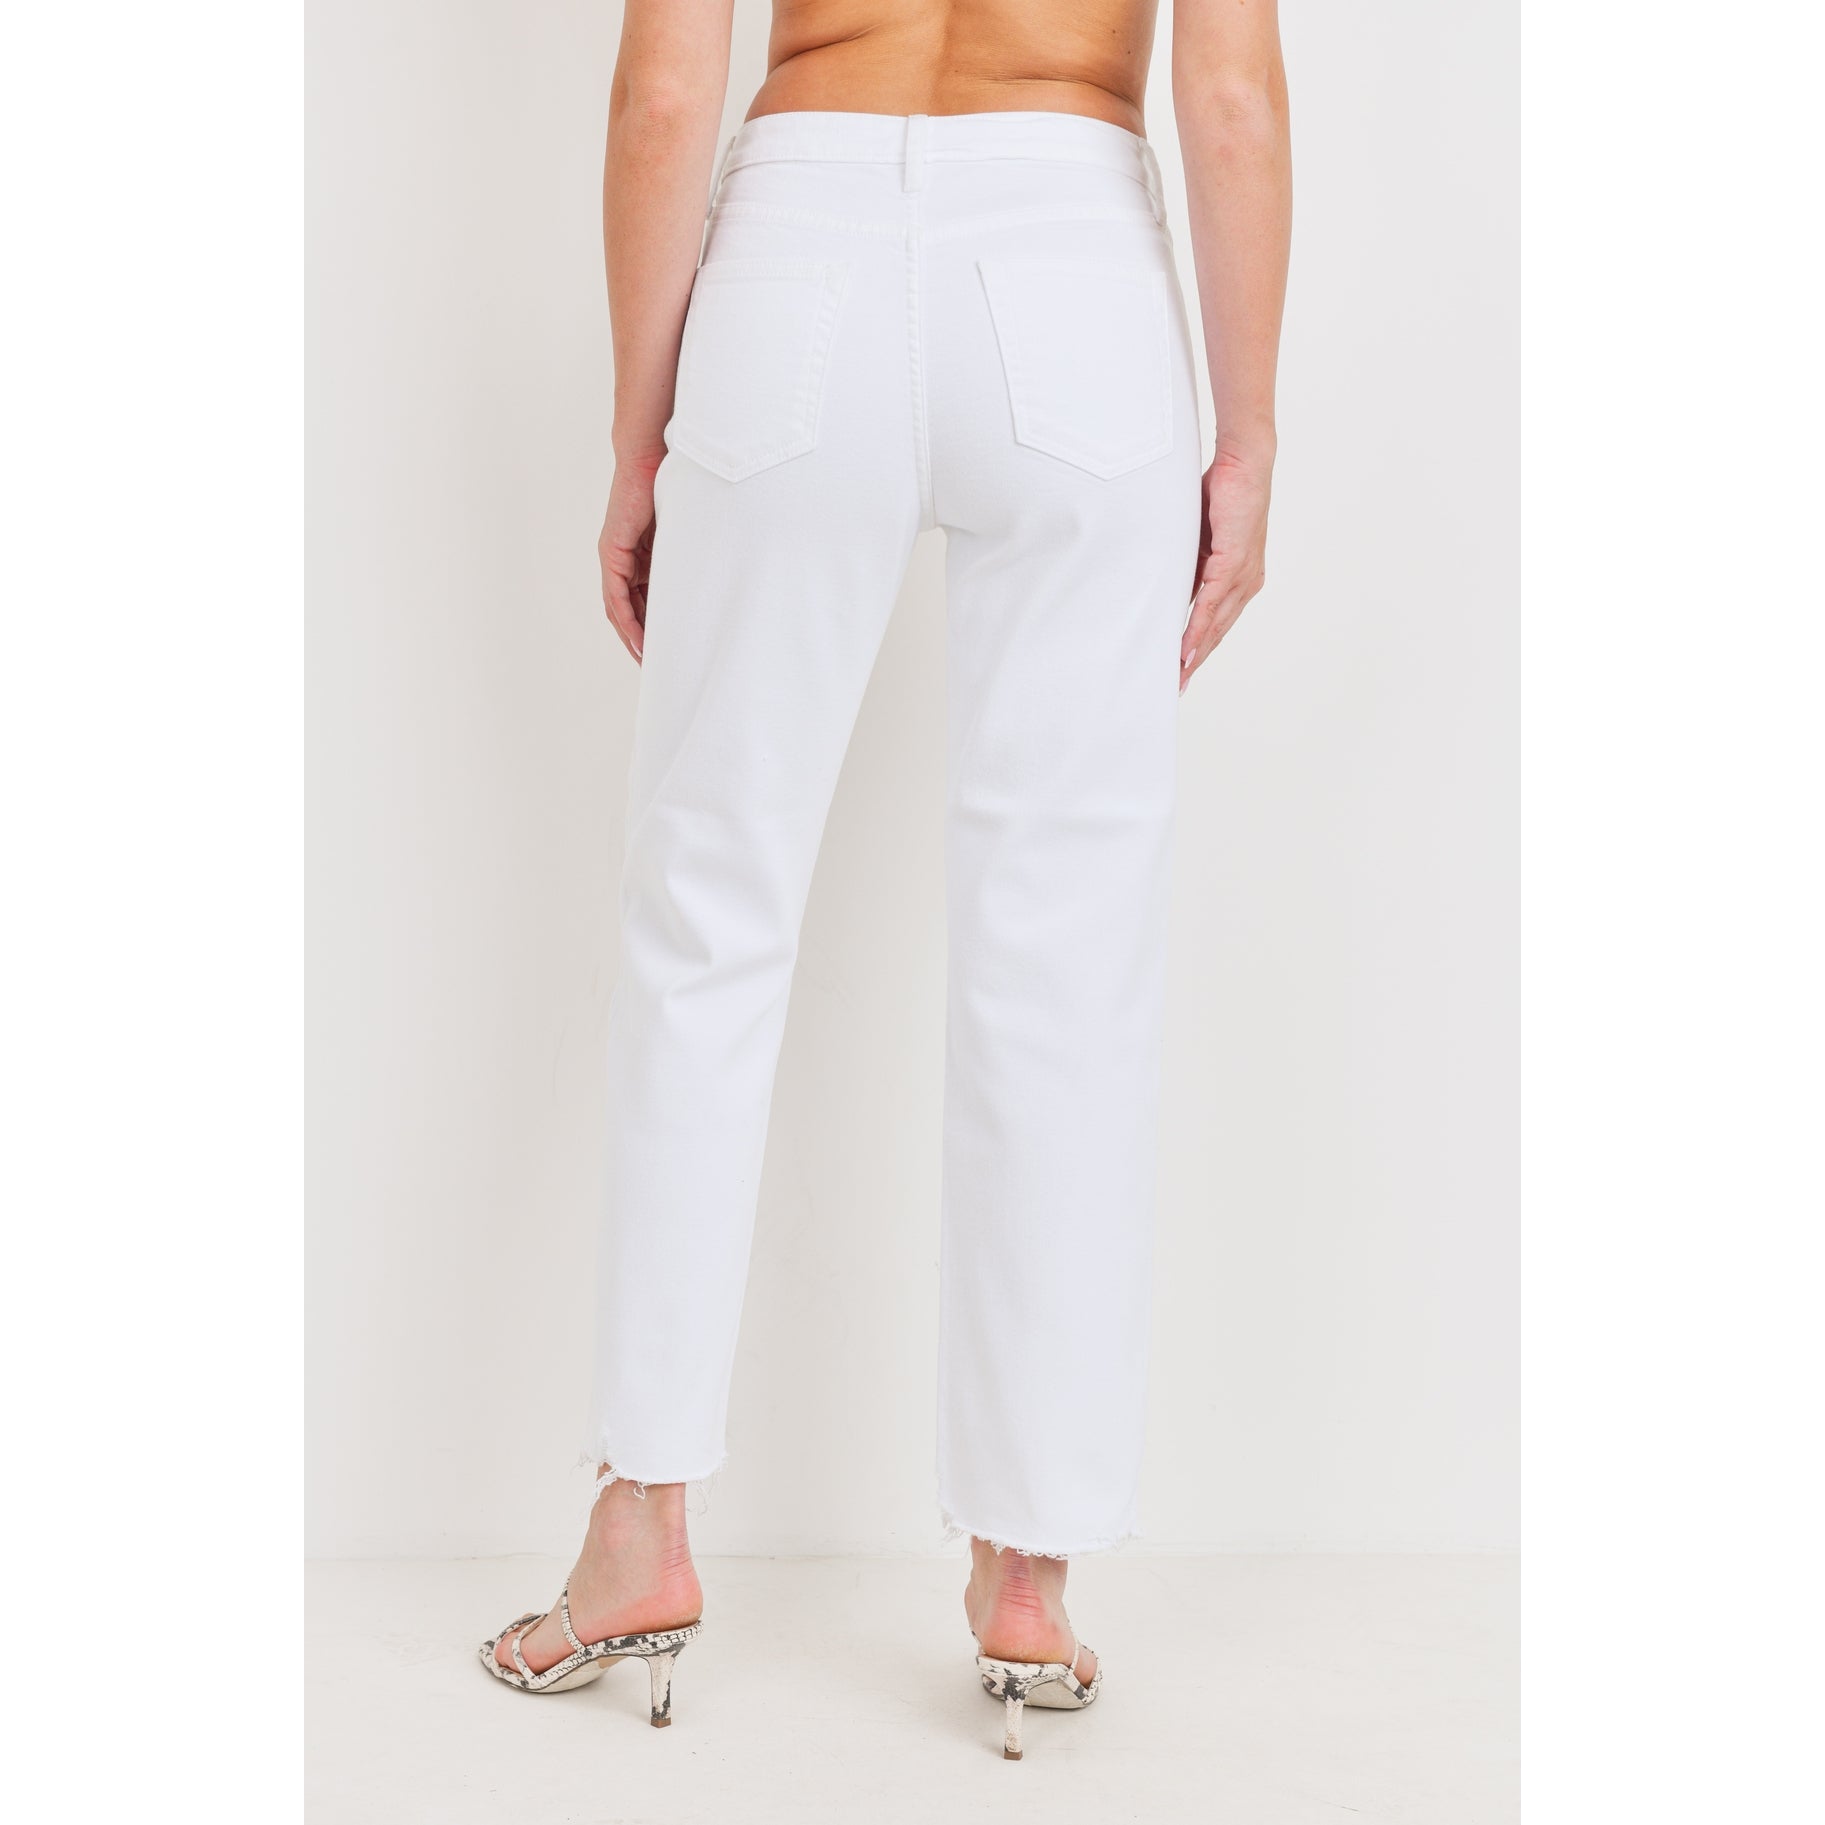 The Hera White High Rise Straight Jeans by Just Black Denim